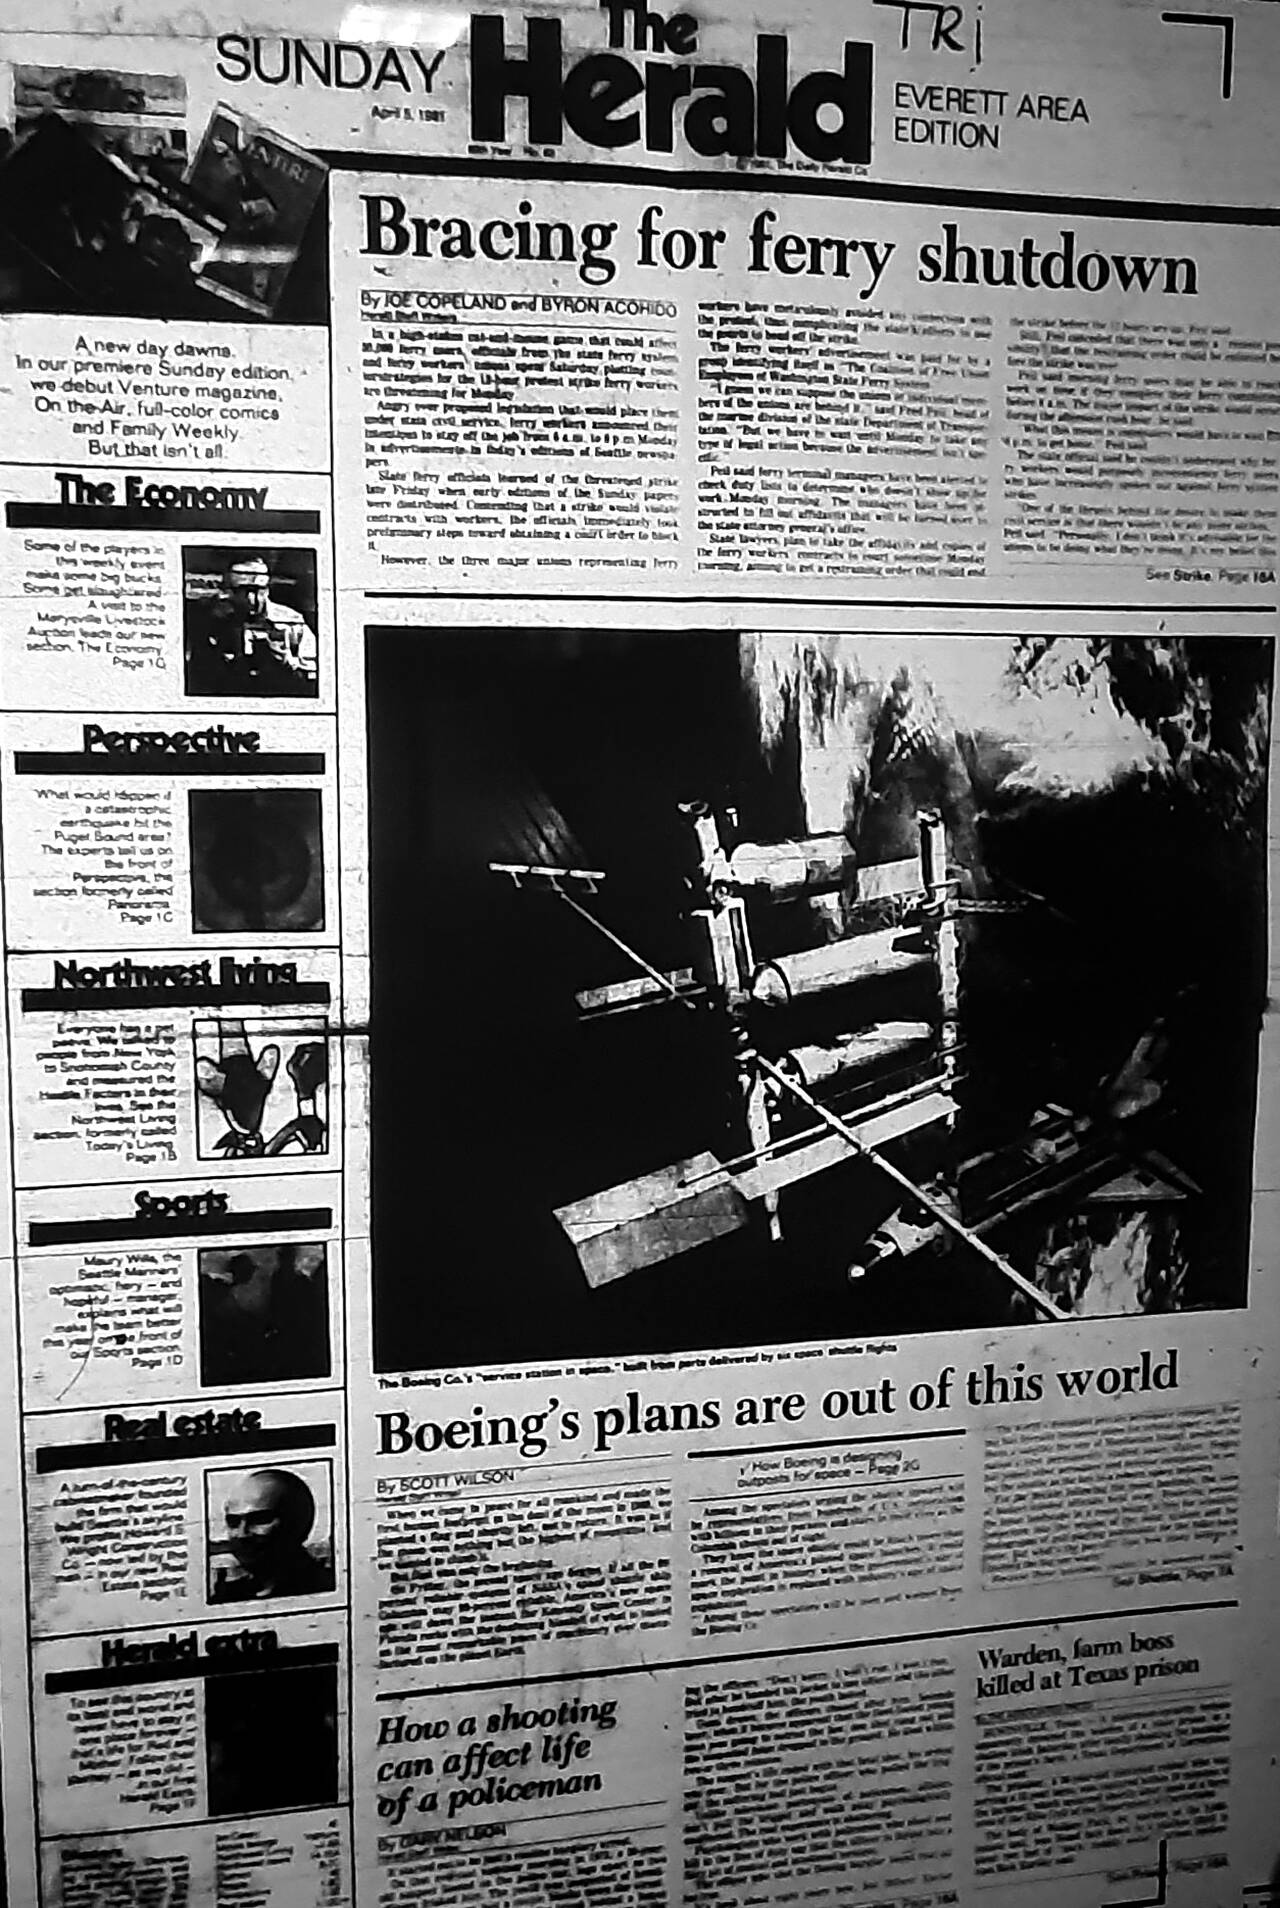 The Herald’s first Sunday edition, shown here on a microfilm viewer, was published April 5, 1981. (Julie Muhlstein / The Herald)